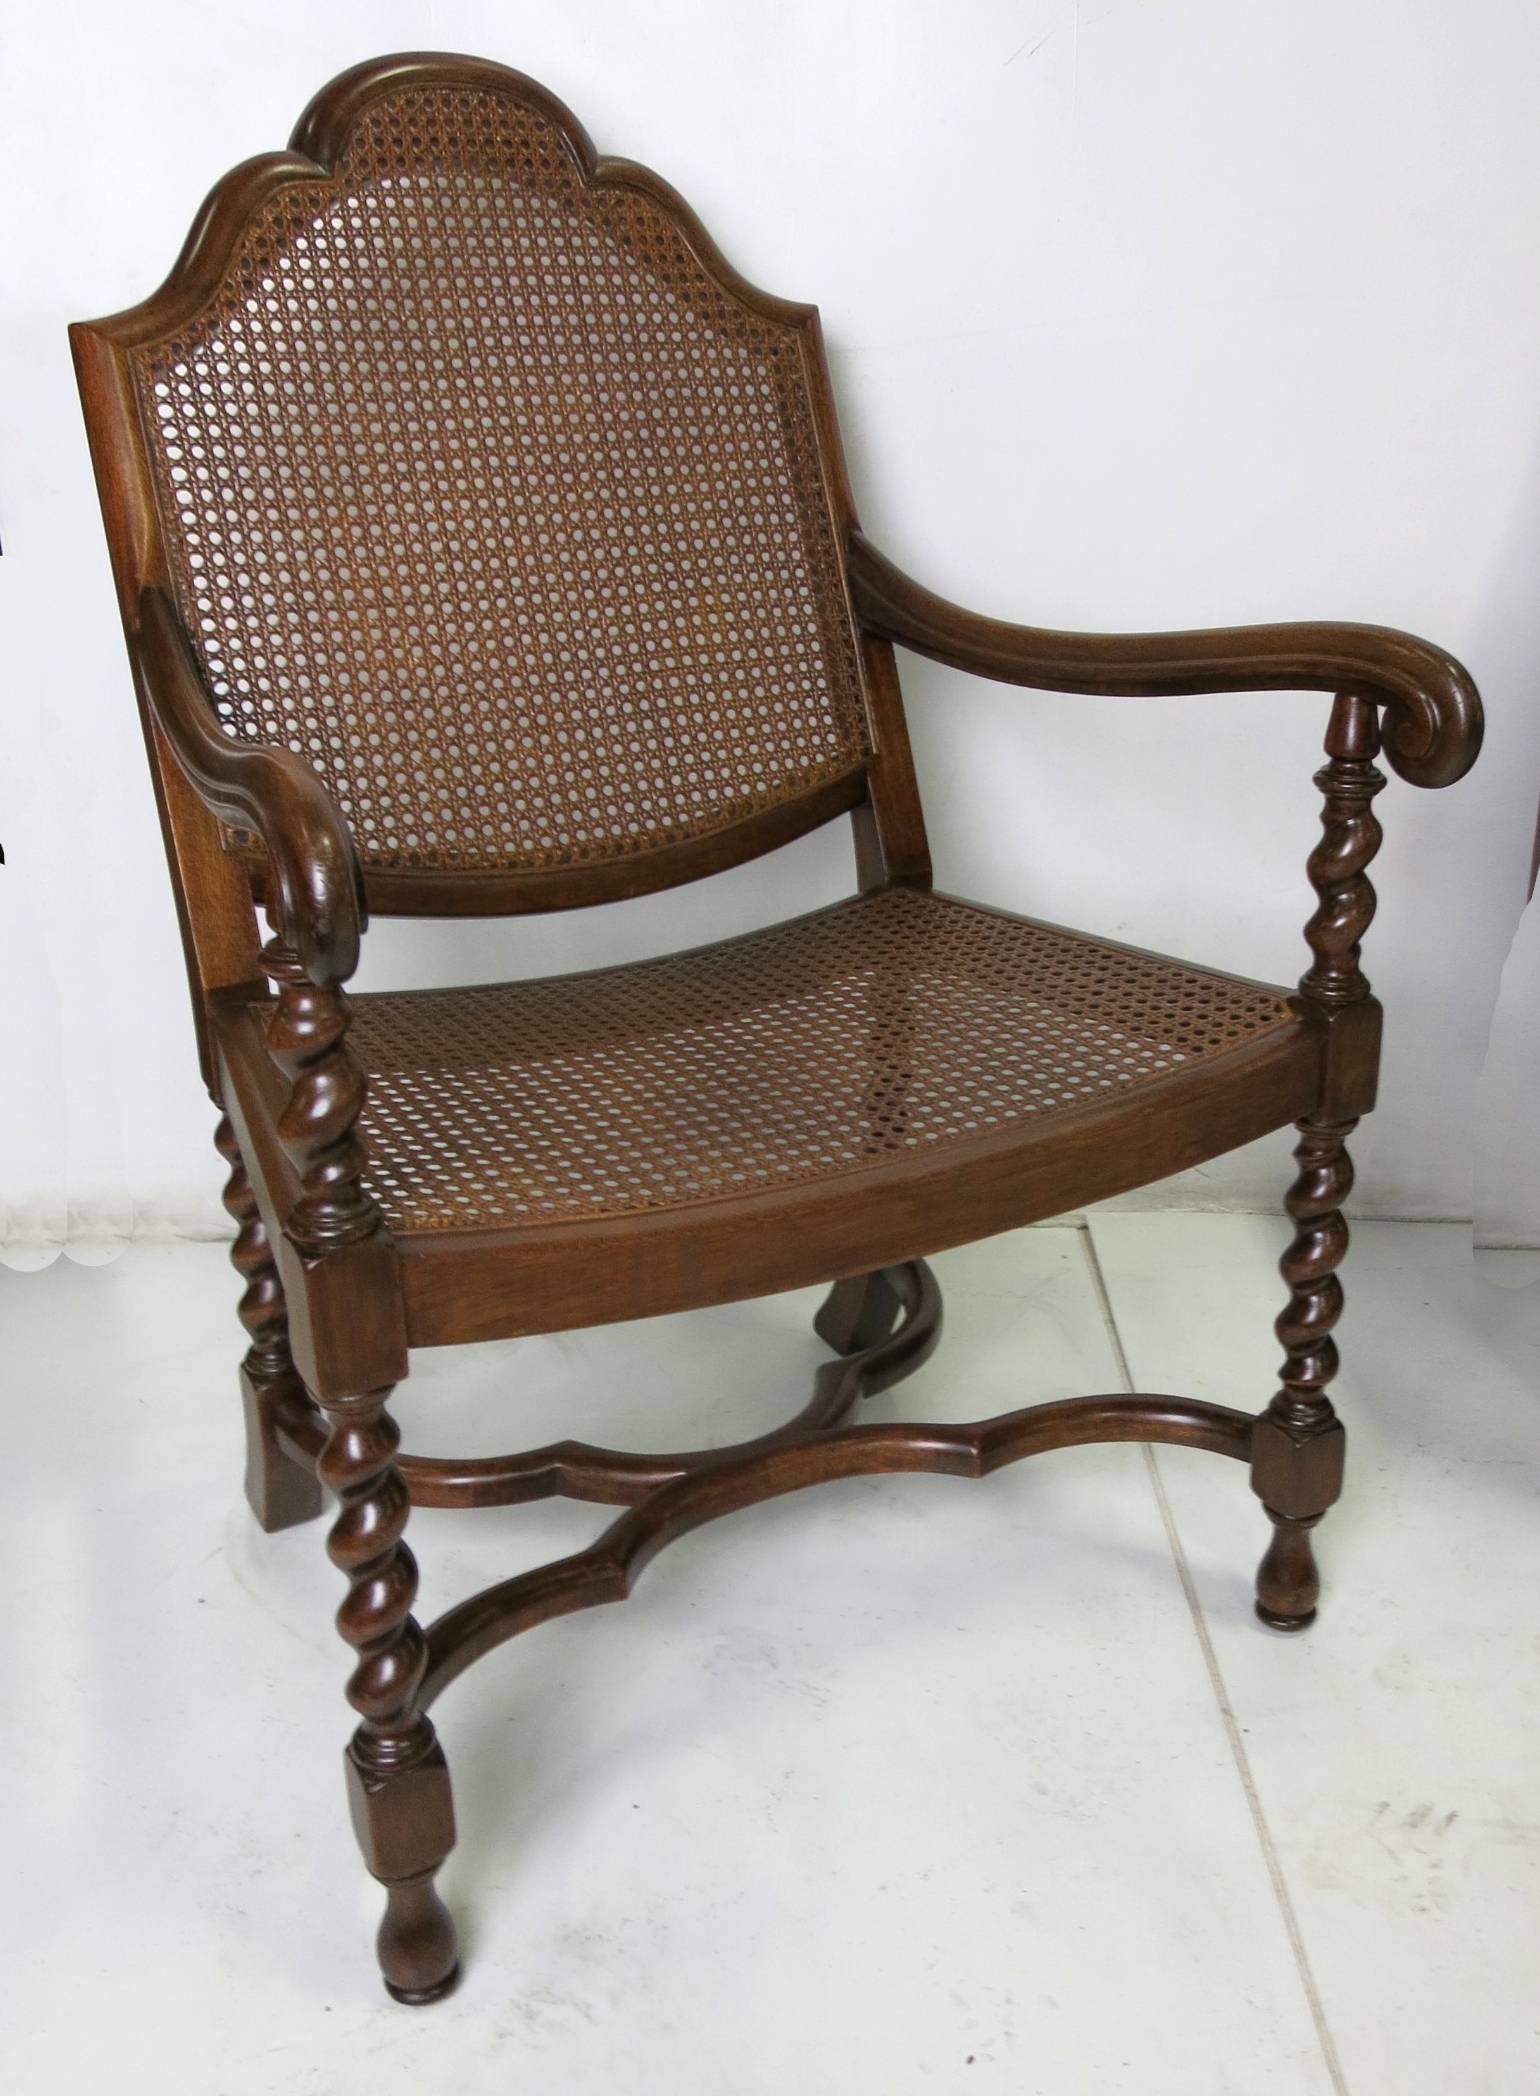 Meticulously restored hand-carved mahogany armchair with caned seat and back. Fabulous quality workmanship and materials. The chair feature ample dimensions and will work well as either a man's or woman's desk chair.